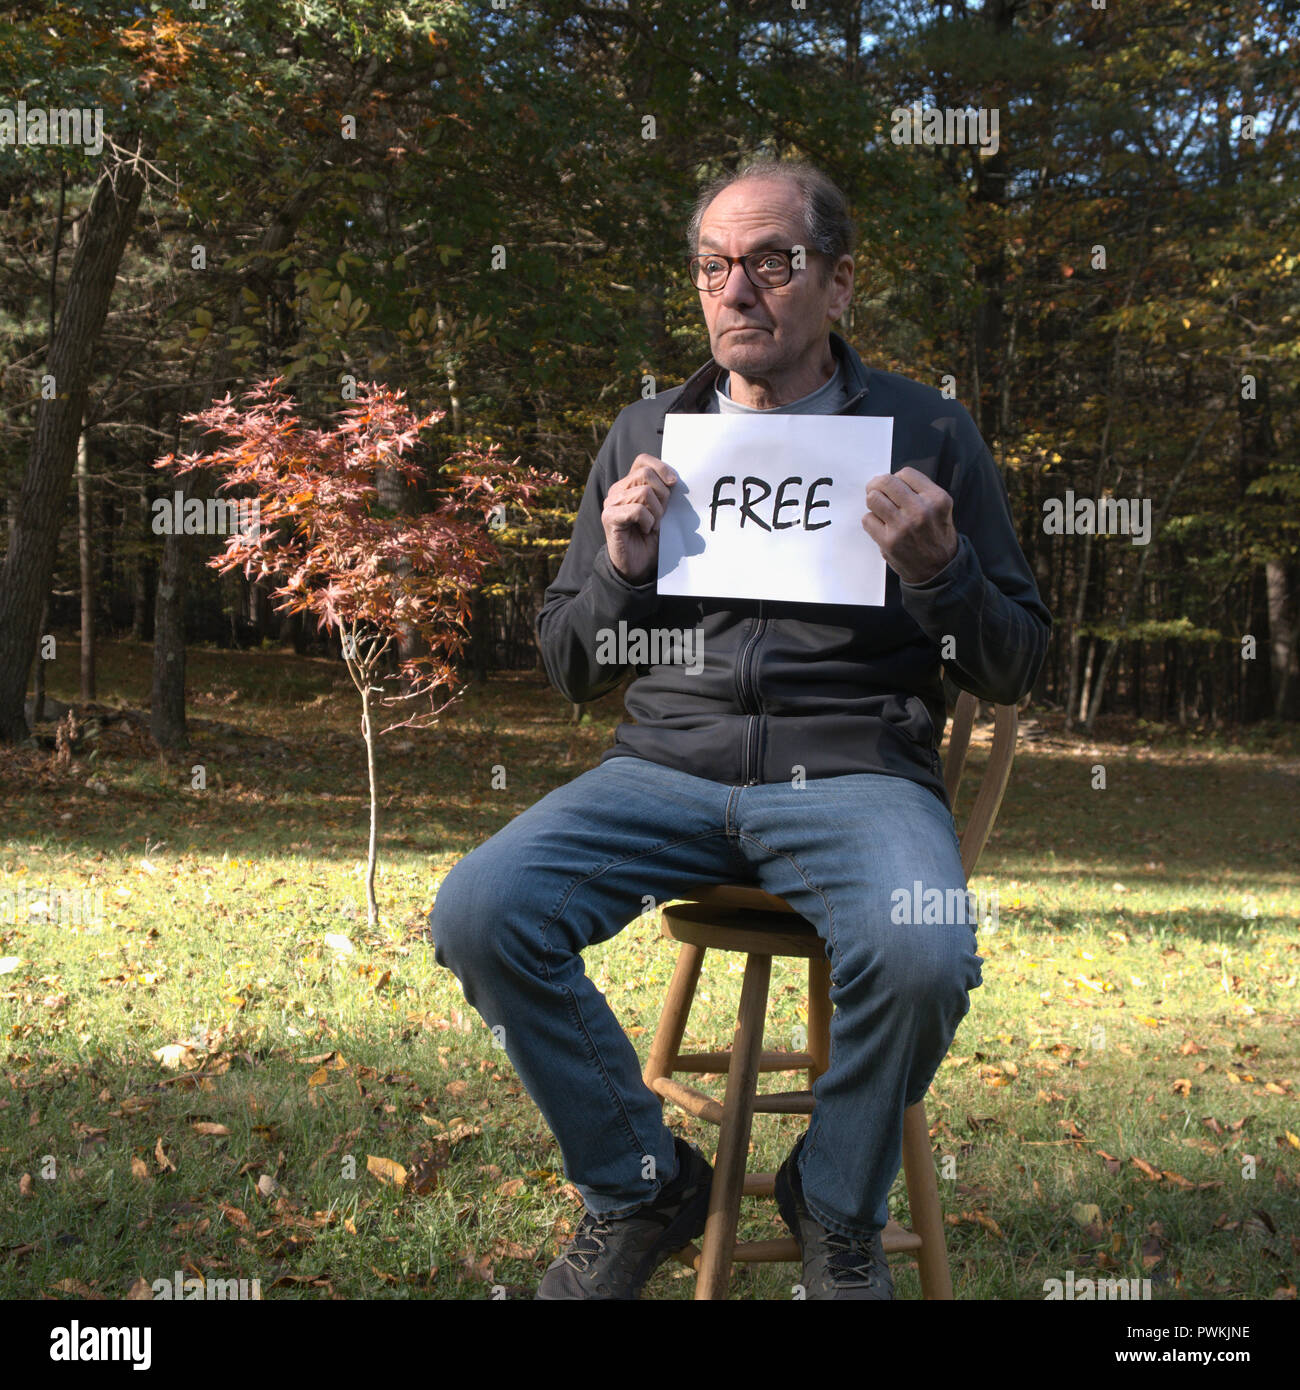 forlorn man on lawn holding free sign Stock Photo